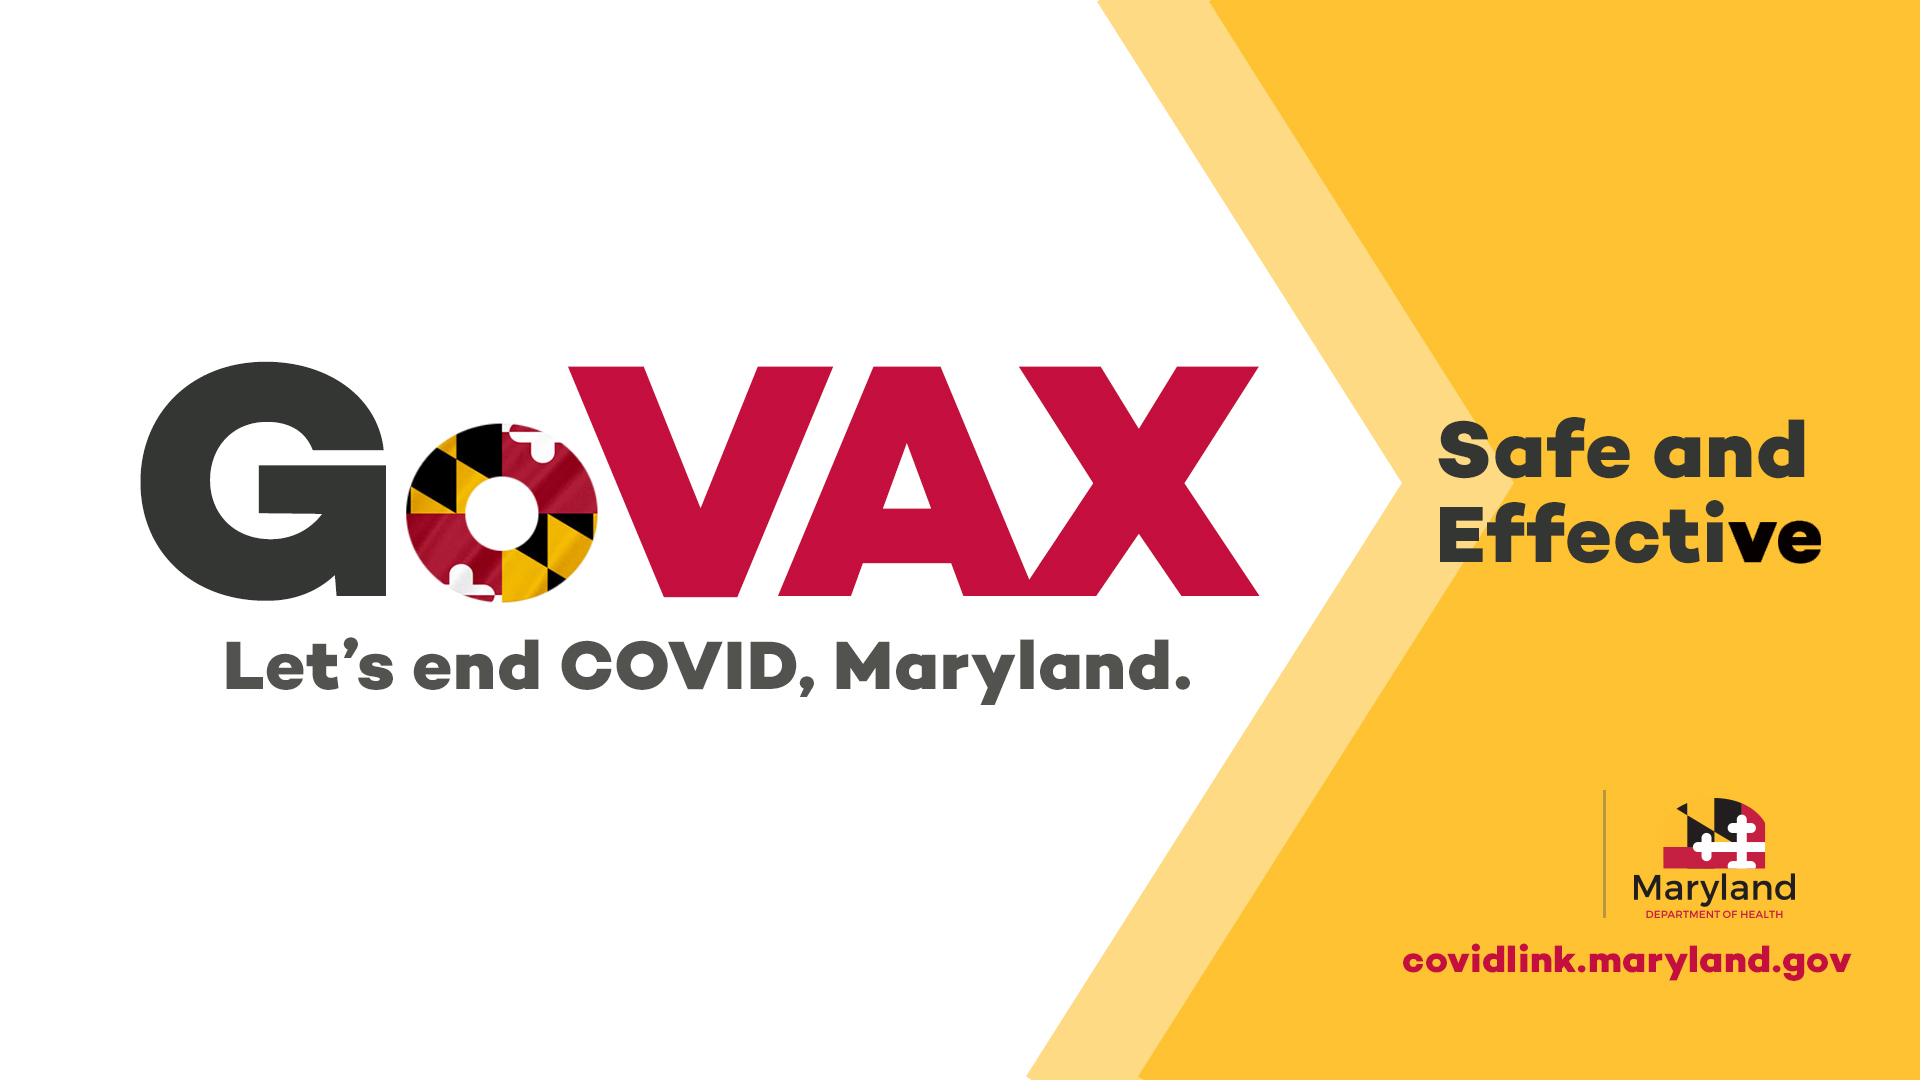 Let's end COVID, Maryland!